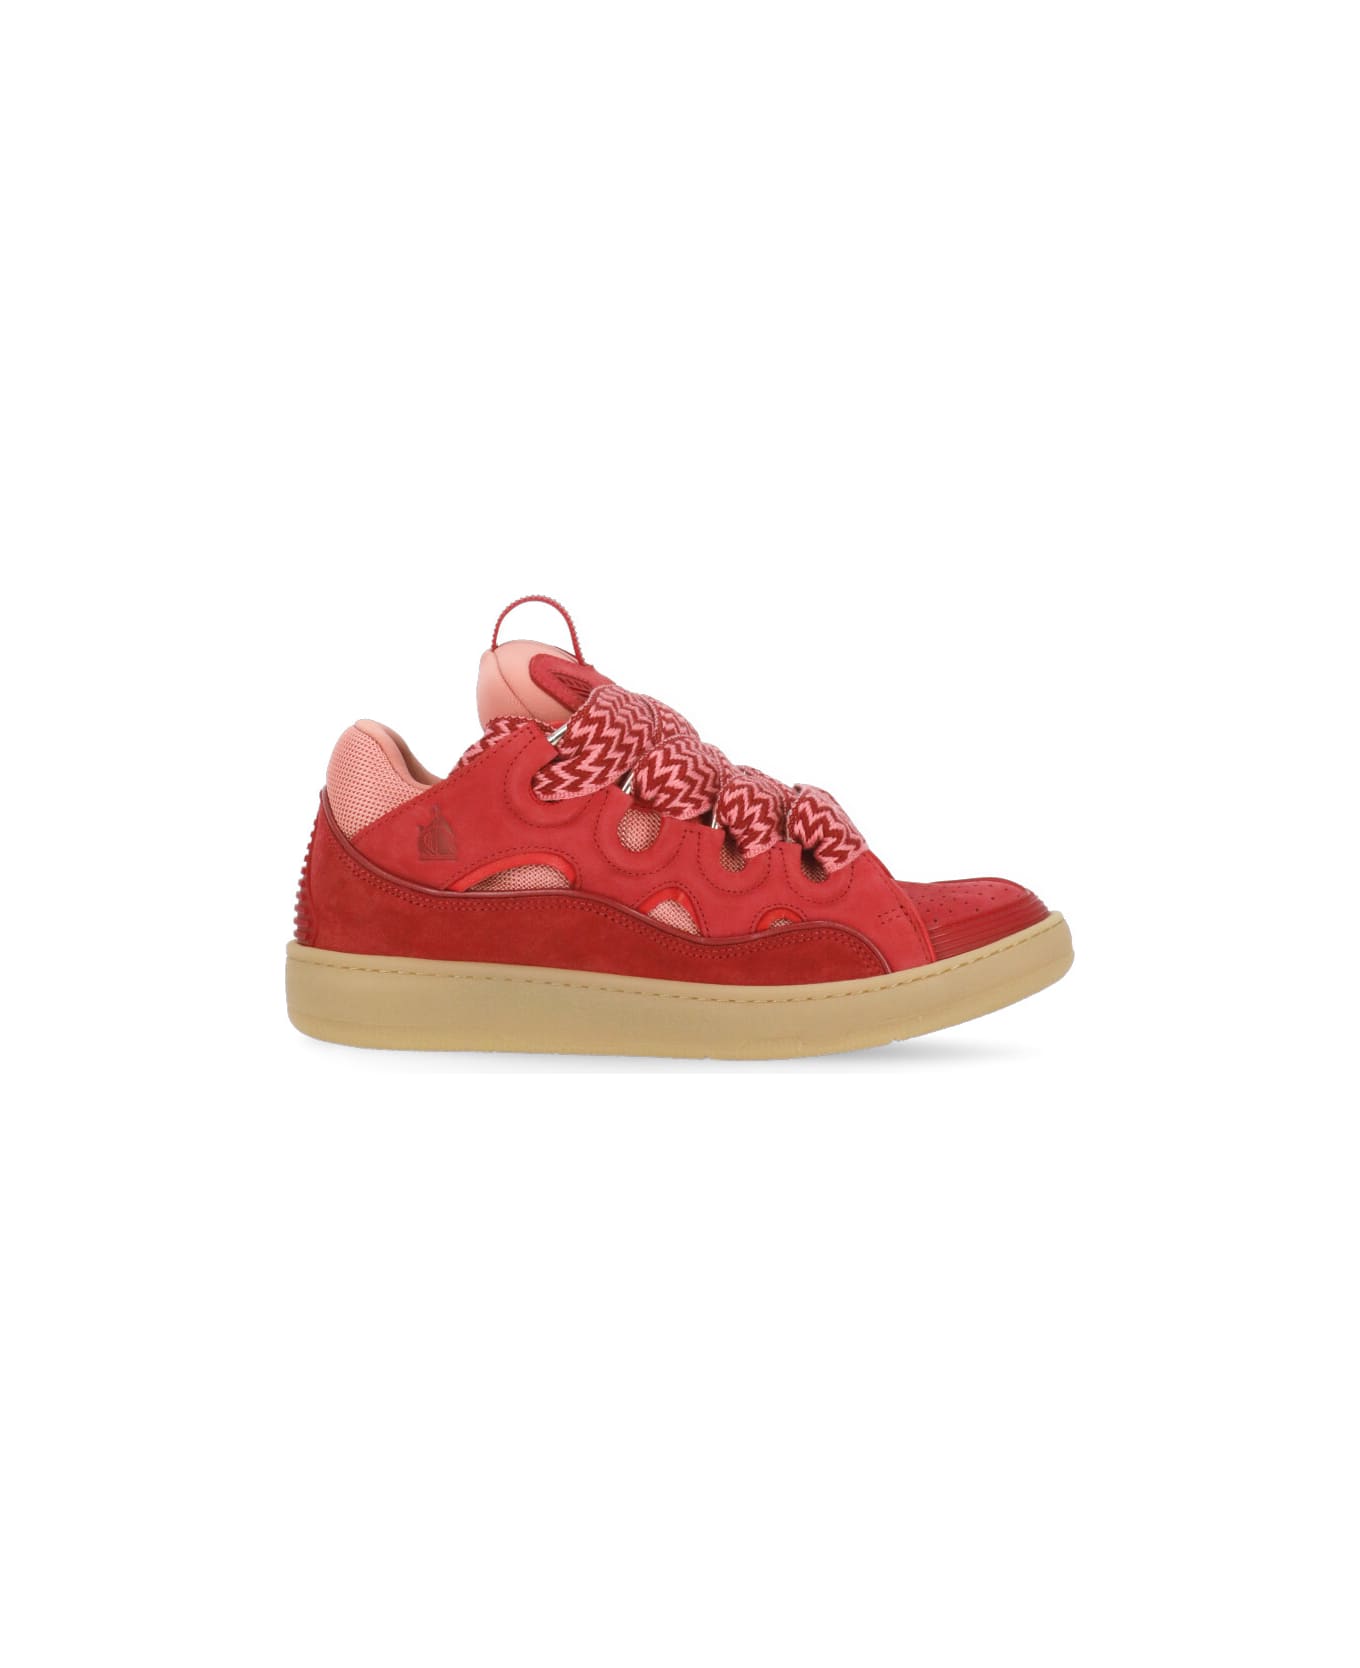 Lanvin Curb Sneakers - Red